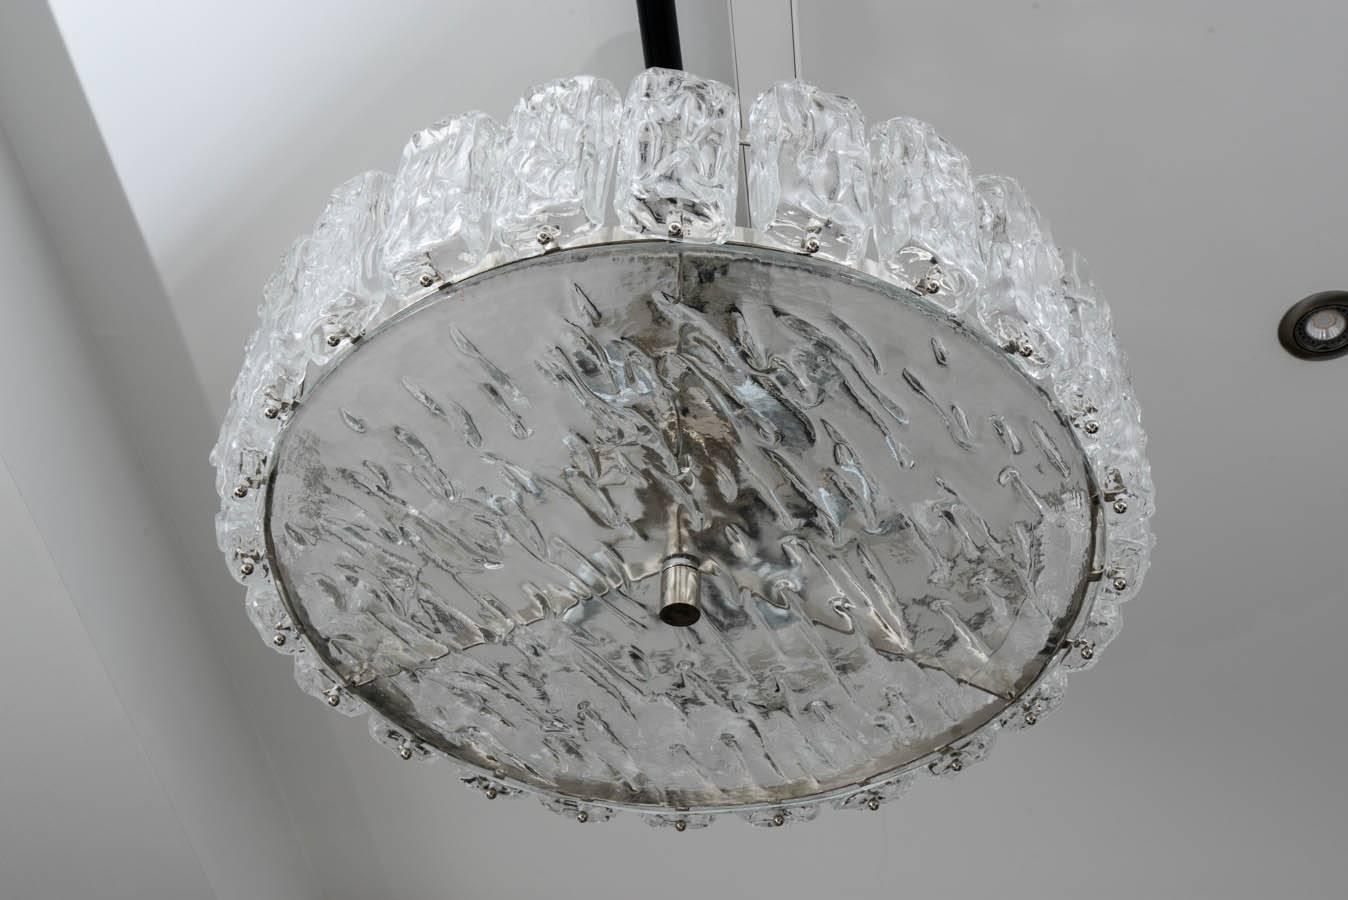 Murano chandelier, ceiling light in thick frosted glass.

We have a pair.

